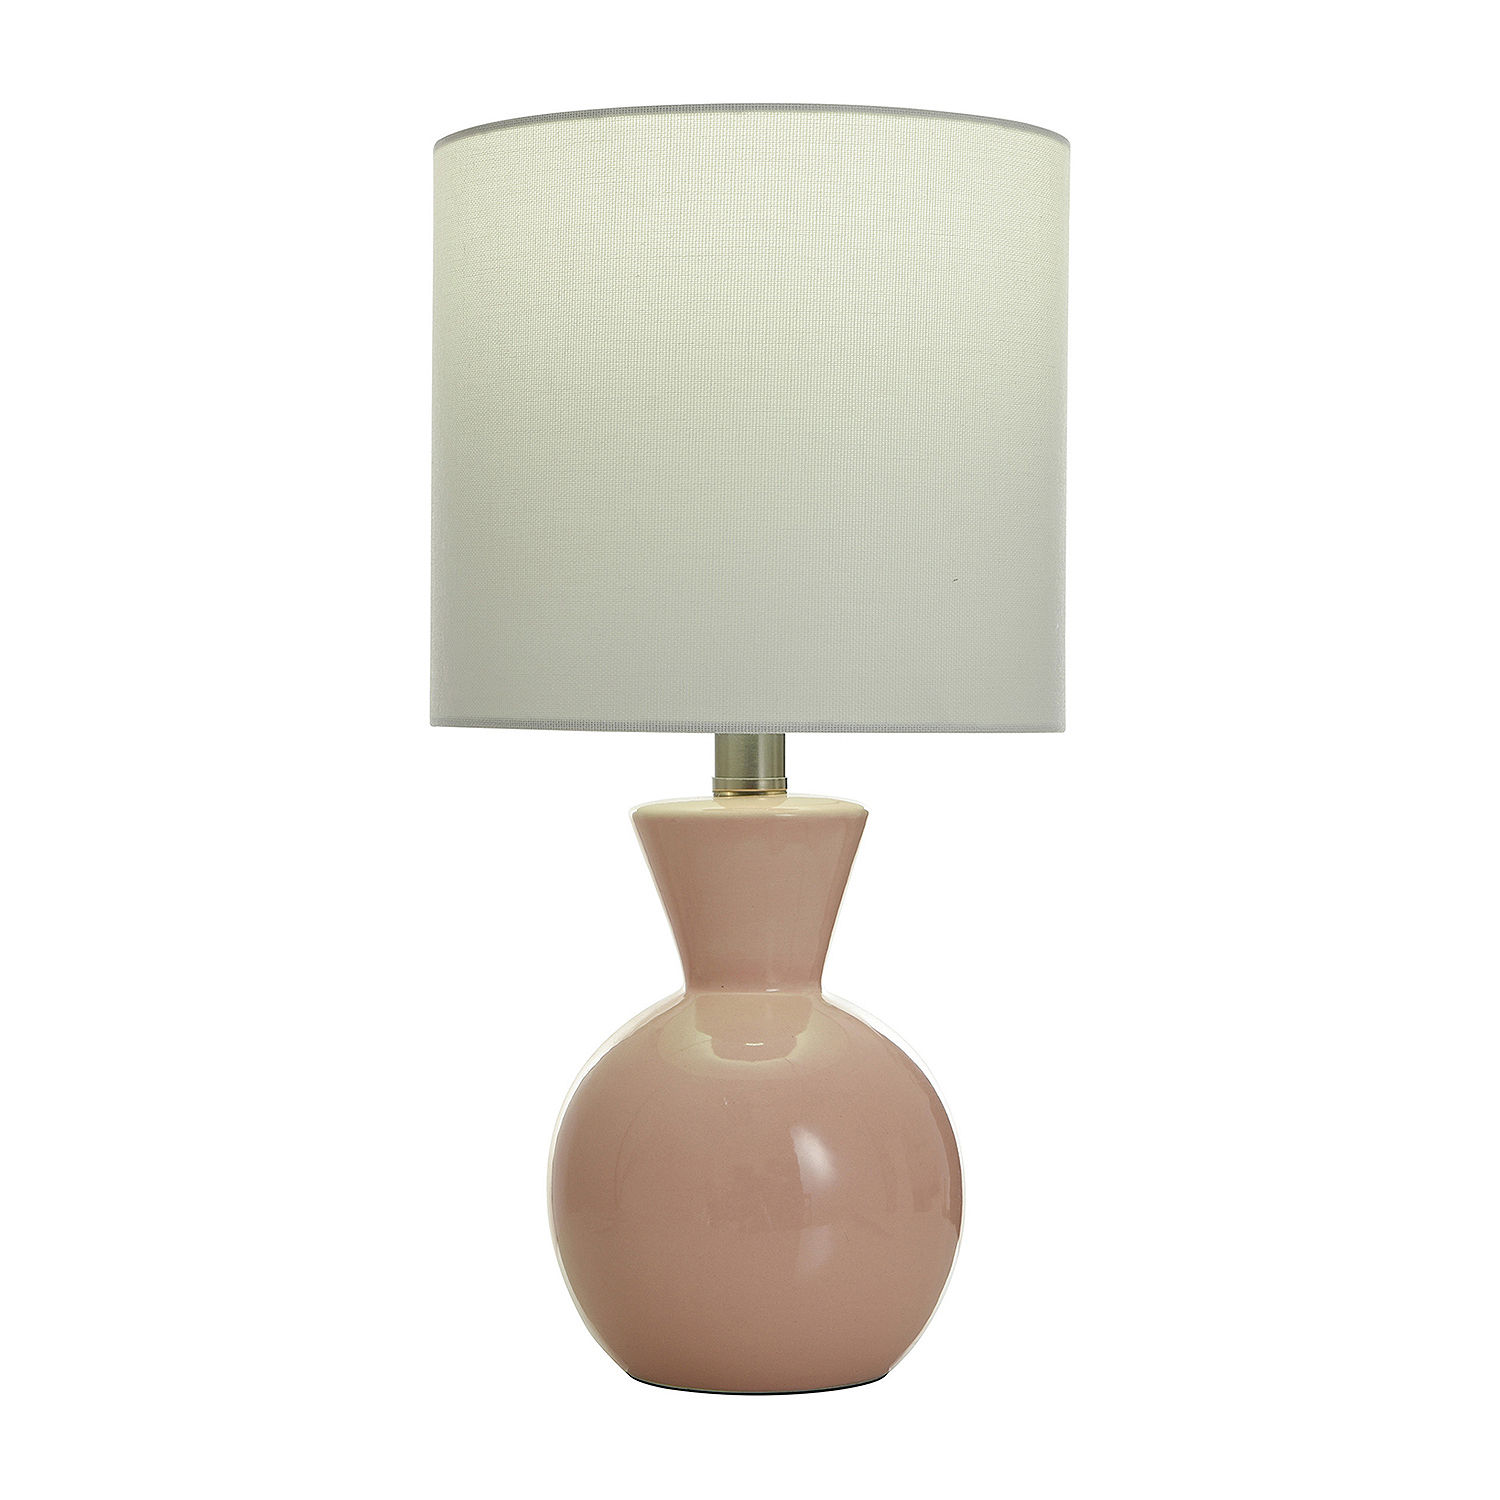 Collective Design By Stylecraft Soft Pink Ceramic Table Lamp ...